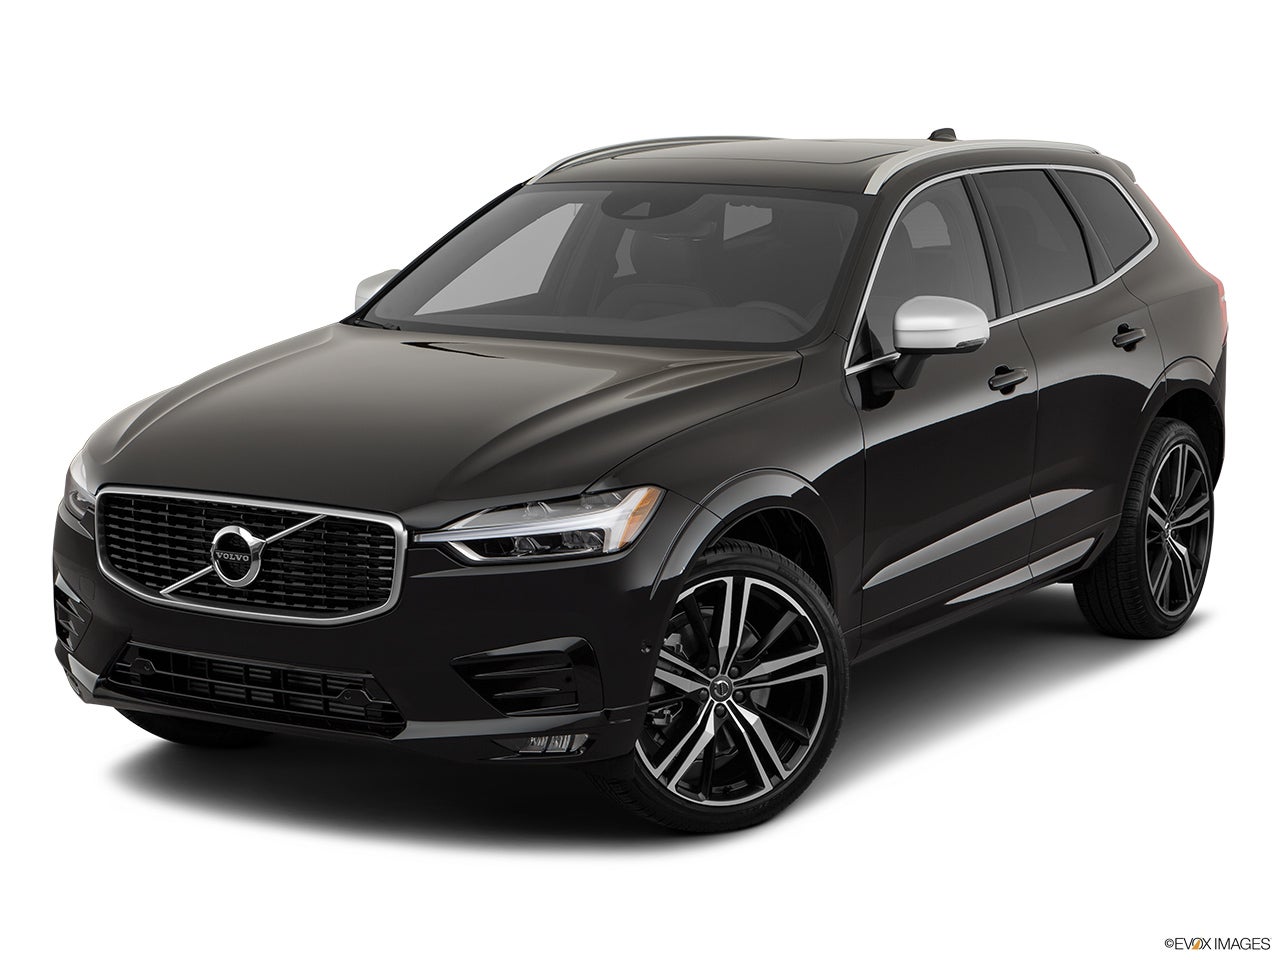 https://www.chargepoint.com/sites/default/files/2019-01/volvo%20xc60.jpg